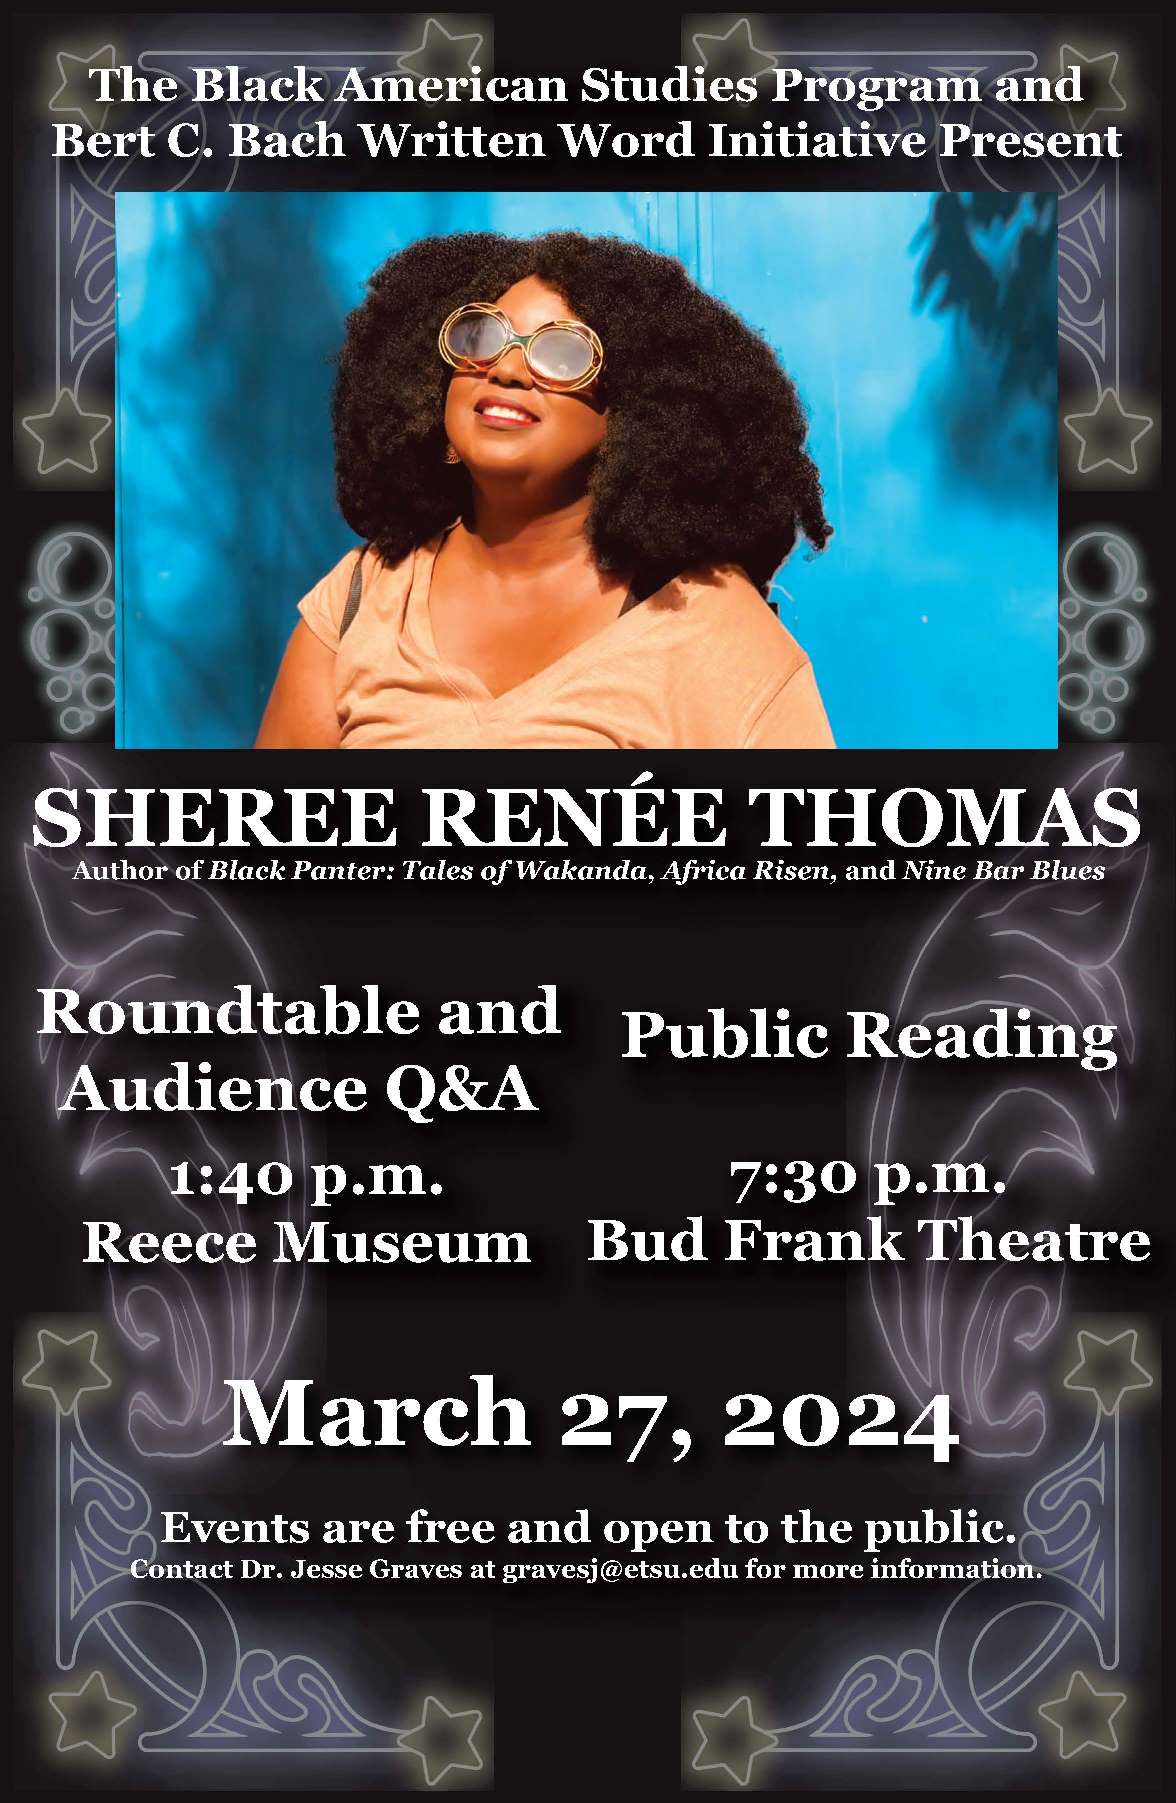 Sheree Renee Thomas Poster with event information in the commentary above.